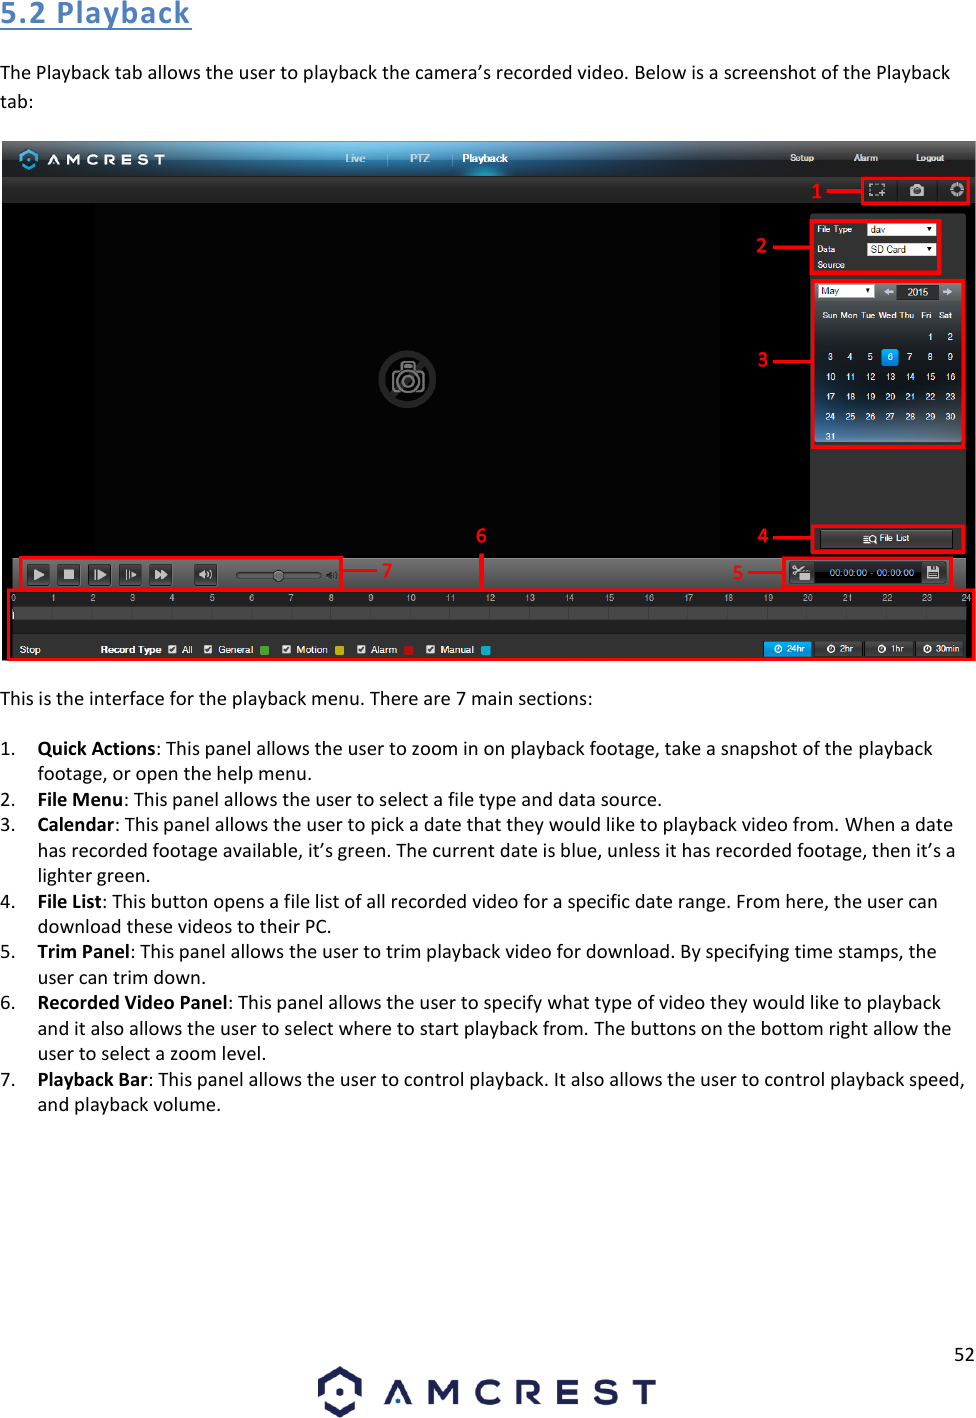 52  5.2 Playback The Playback tab allows the user to playback the camera’s recorded video. Below is a screenshot of the Playback tab:  This is the interface for the playback menu. There are 7 main sections: 1. Quick Actions: This panel allows the user to zoom in on playback footage, take a snapshot of the playback footage, or open the help menu. 2. File Menu: This panel allows the user to select a file type and data source. 3. Calendar: This panel allows the user to pick a date that they would like to playback video from. When a date has recorded footage available, it’s green. The current date is blue, unless it has recorded footage, then it’s a lighter green. 4. File List: This button opens a file list of all recorded video for a specific date range. From here, the user can download these videos to their PC. 5. Trim Panel: This panel allows the user to trim playback video for download. By specifying time stamps, the user can trim down.  6. Recorded Video Panel: This panel allows the user to specify what type of video they would like to playback and it also allows the user to select where to start playback from. The buttons on the bottom right allow the user to select a zoom level. 7. Playback Bar: This panel allows the user to control playback. It also allows the user to control playback speed, and playback volume. 